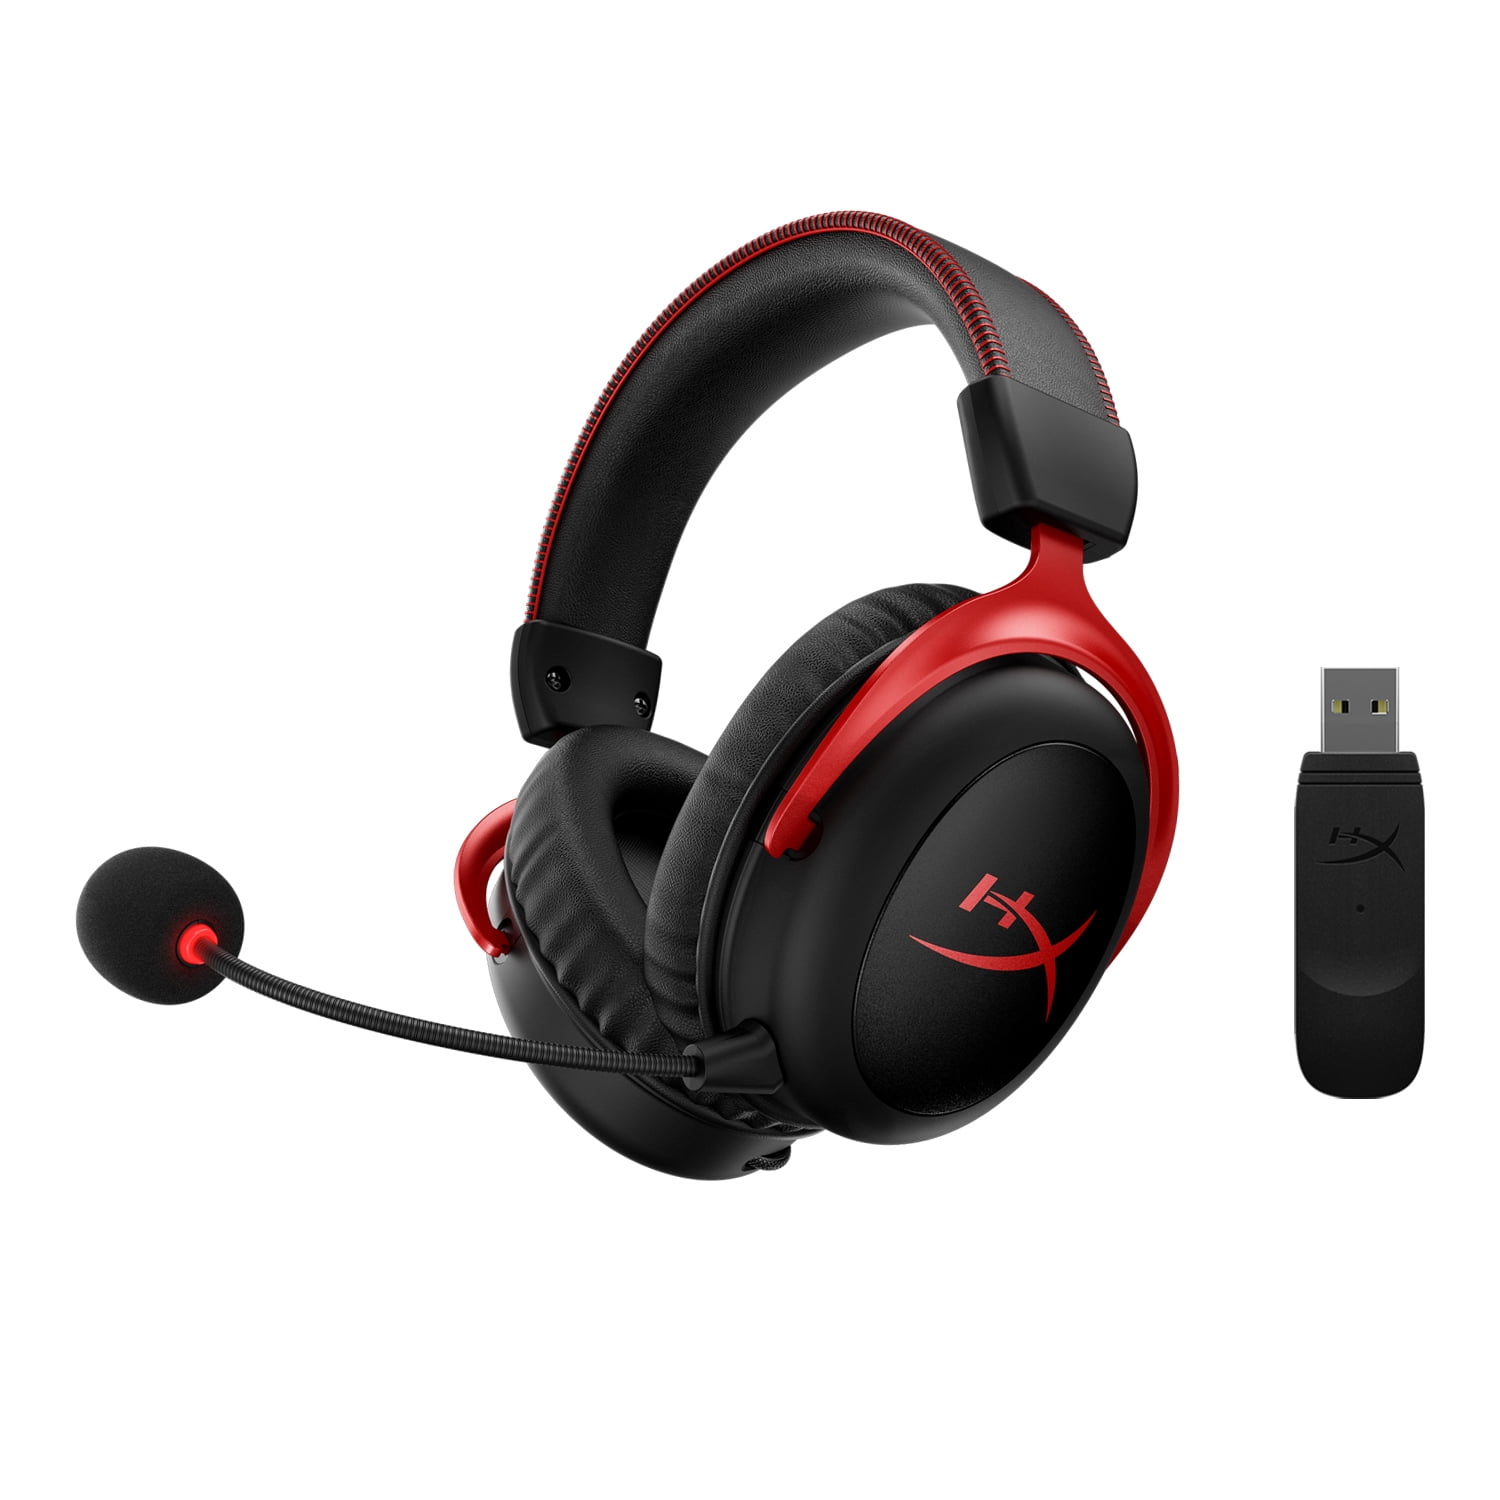 haar Toevoeging van nu af aan HyperX Cloud II Wireless - Gaming Headset for PC, PS4/PS5, Nintendo Switch,  Long Lasting Battery Up to 30 Hours, 7.1 Surround Sound, Memory Foam,  Detachable Noise Cancelling Microphone, Mic Monitoring - Walmart.com